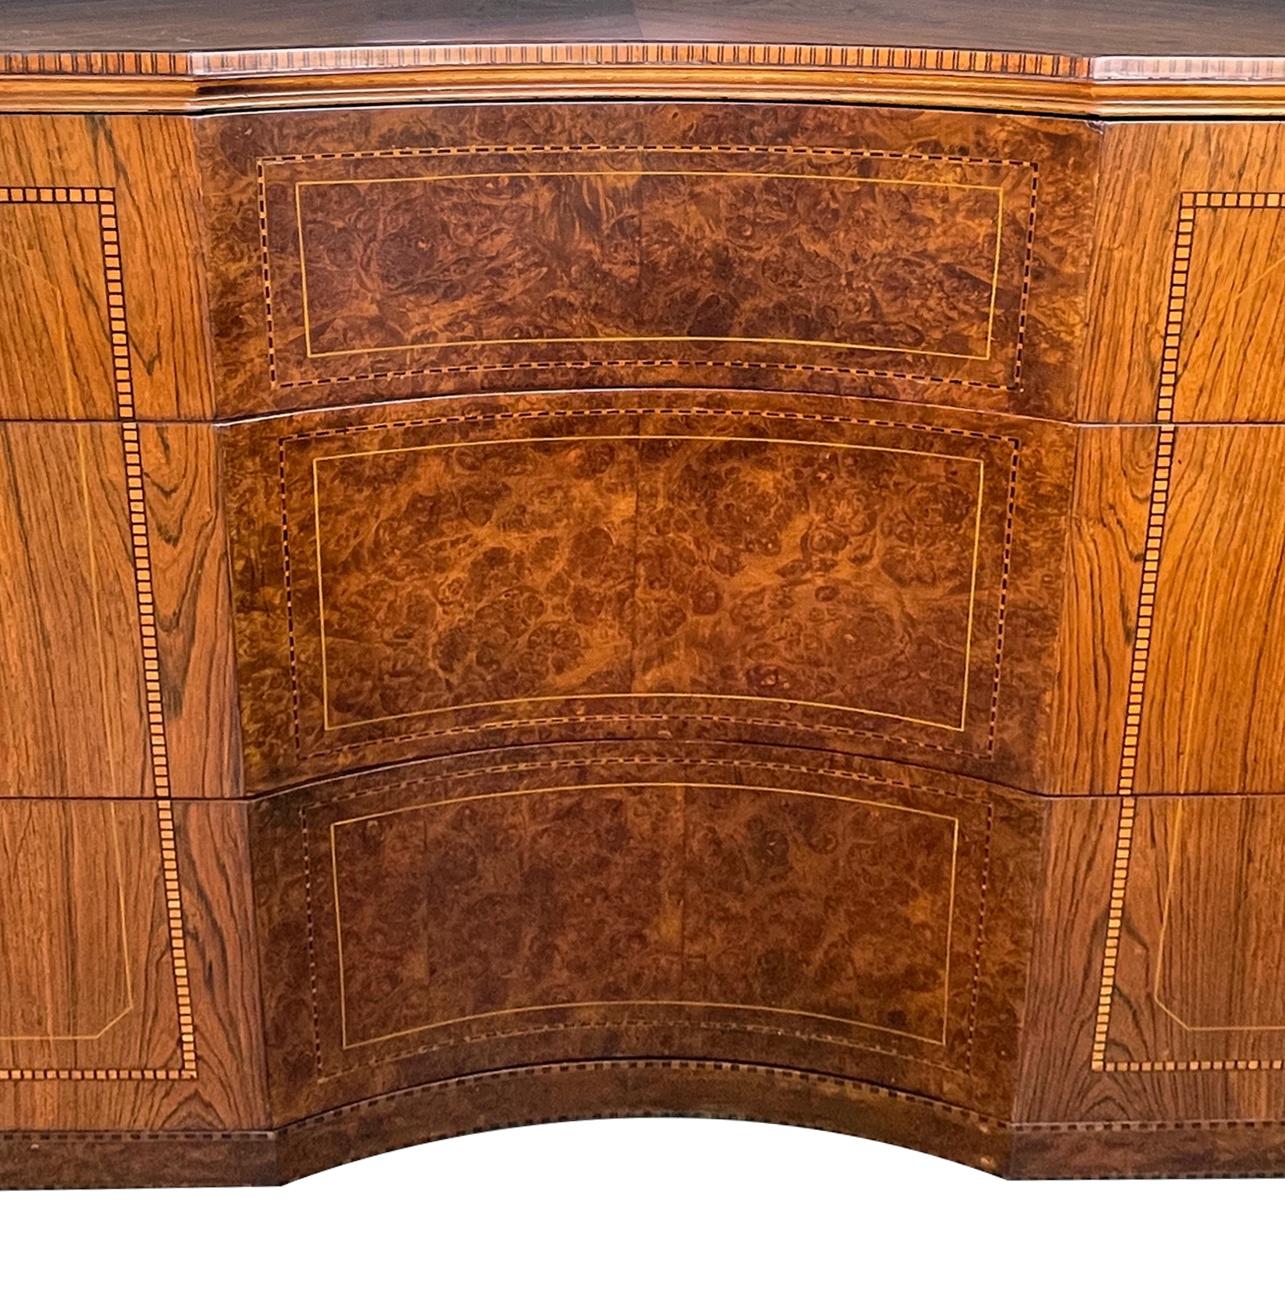 Quality Art Deco Rosewood and Burl Walnut 3-Drawer Chest by Irwin Furniture For Sale 4